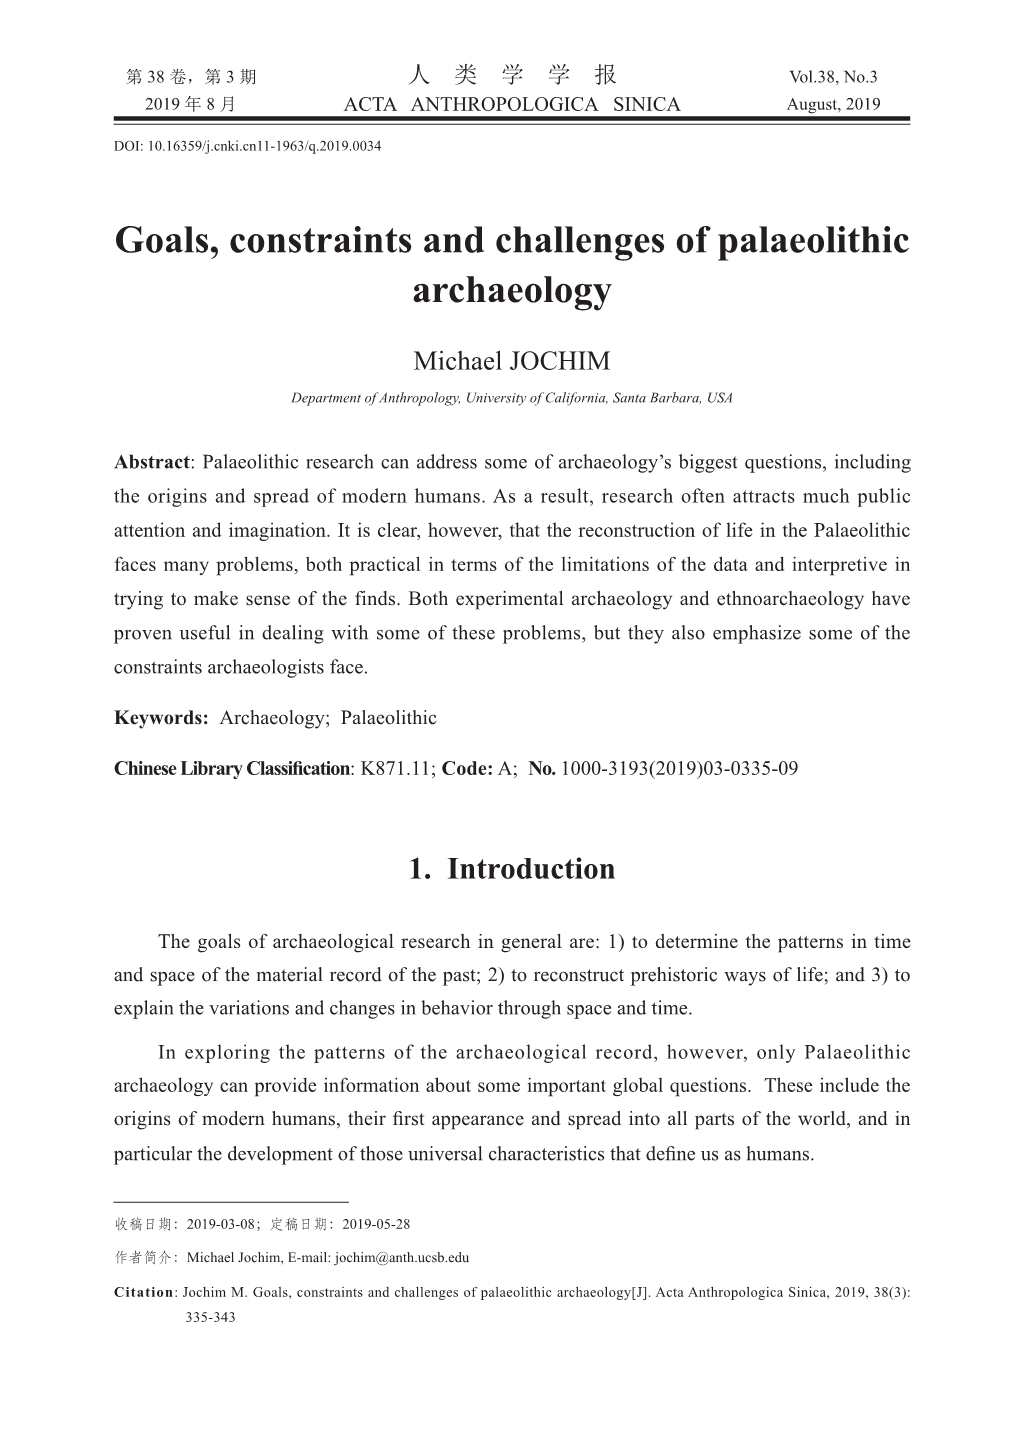 Goals, Constraints and Challenges of Palaeolithic Archaeology